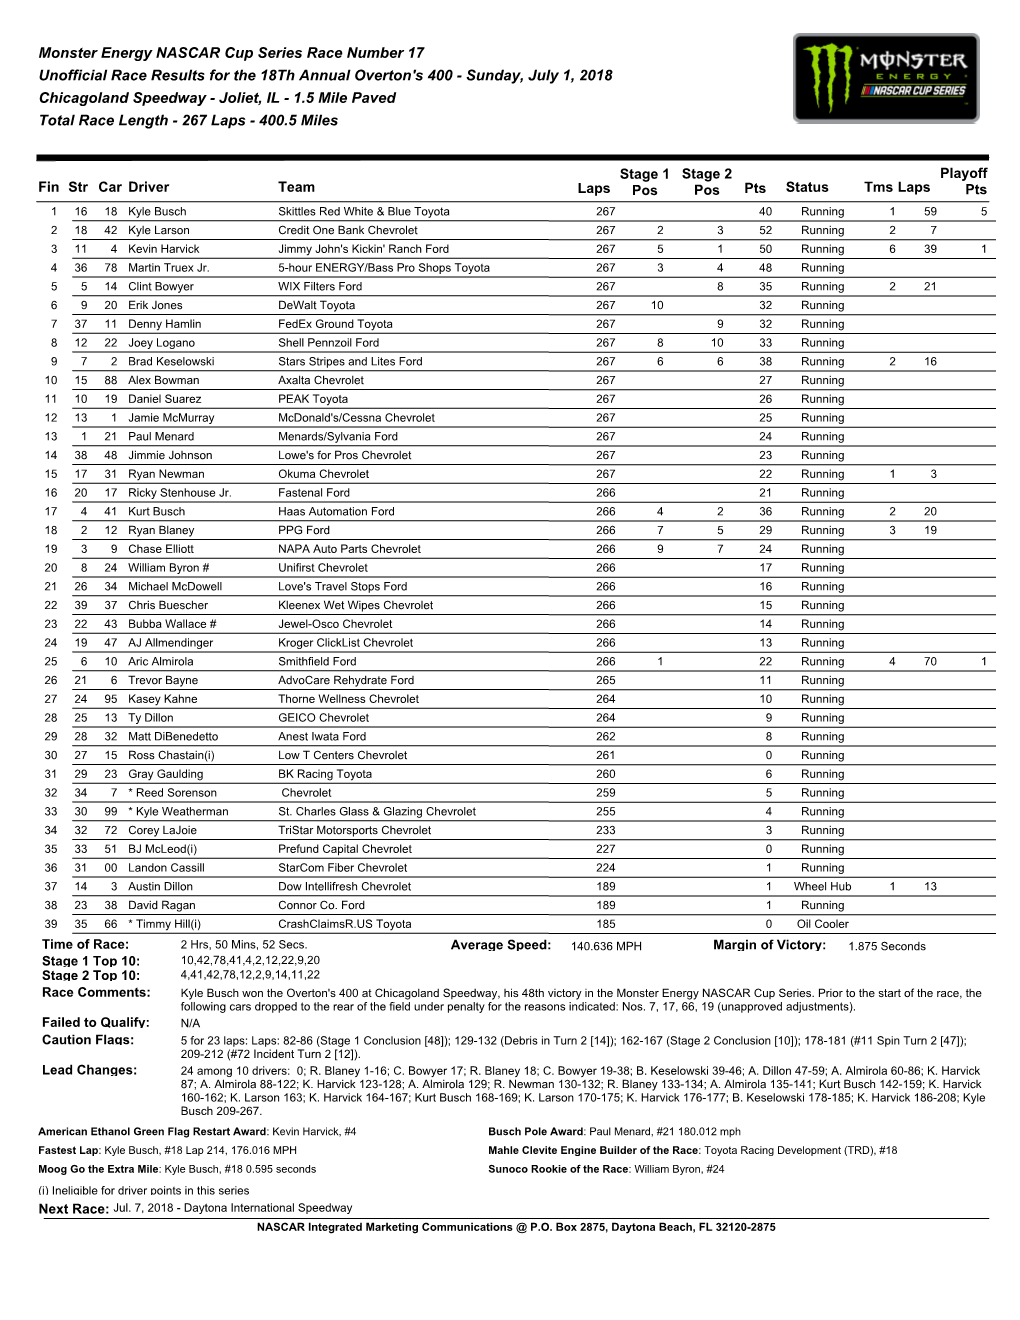 Monster Energy NASCAR Cup Series Race Number 17 Unofficial Race